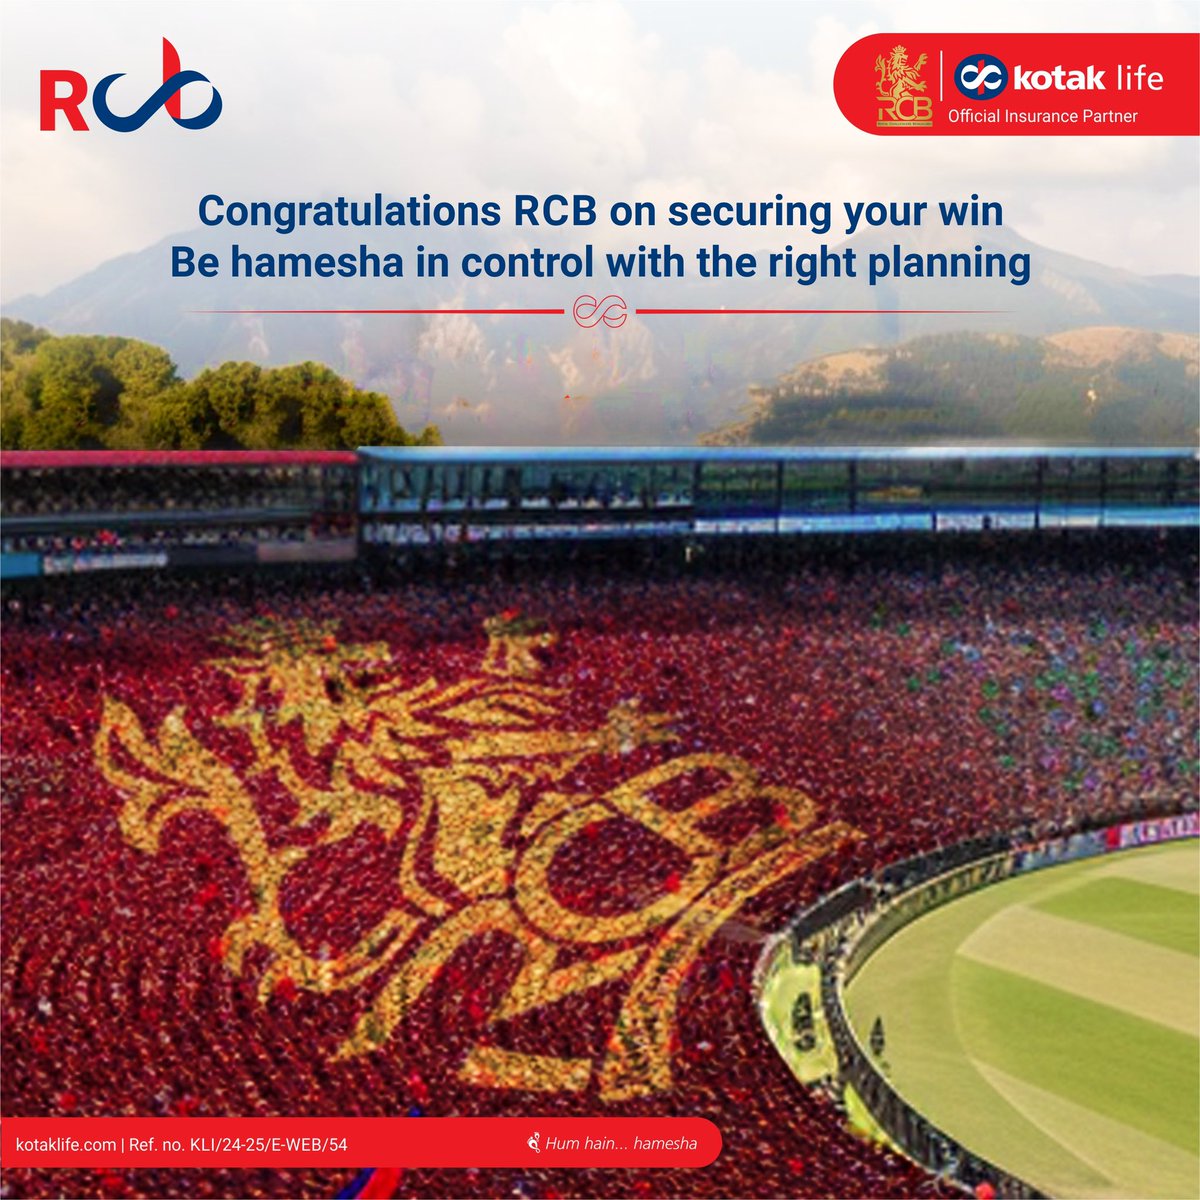 Our men in red continue the winning streak with another victory. Just like Team RCB, you can also secure your way to success with the right planning. T&C: bit.ly/3PvqsyJ #KotakLife #HameshaWithRCB #ipl2024 #lifeinsurance